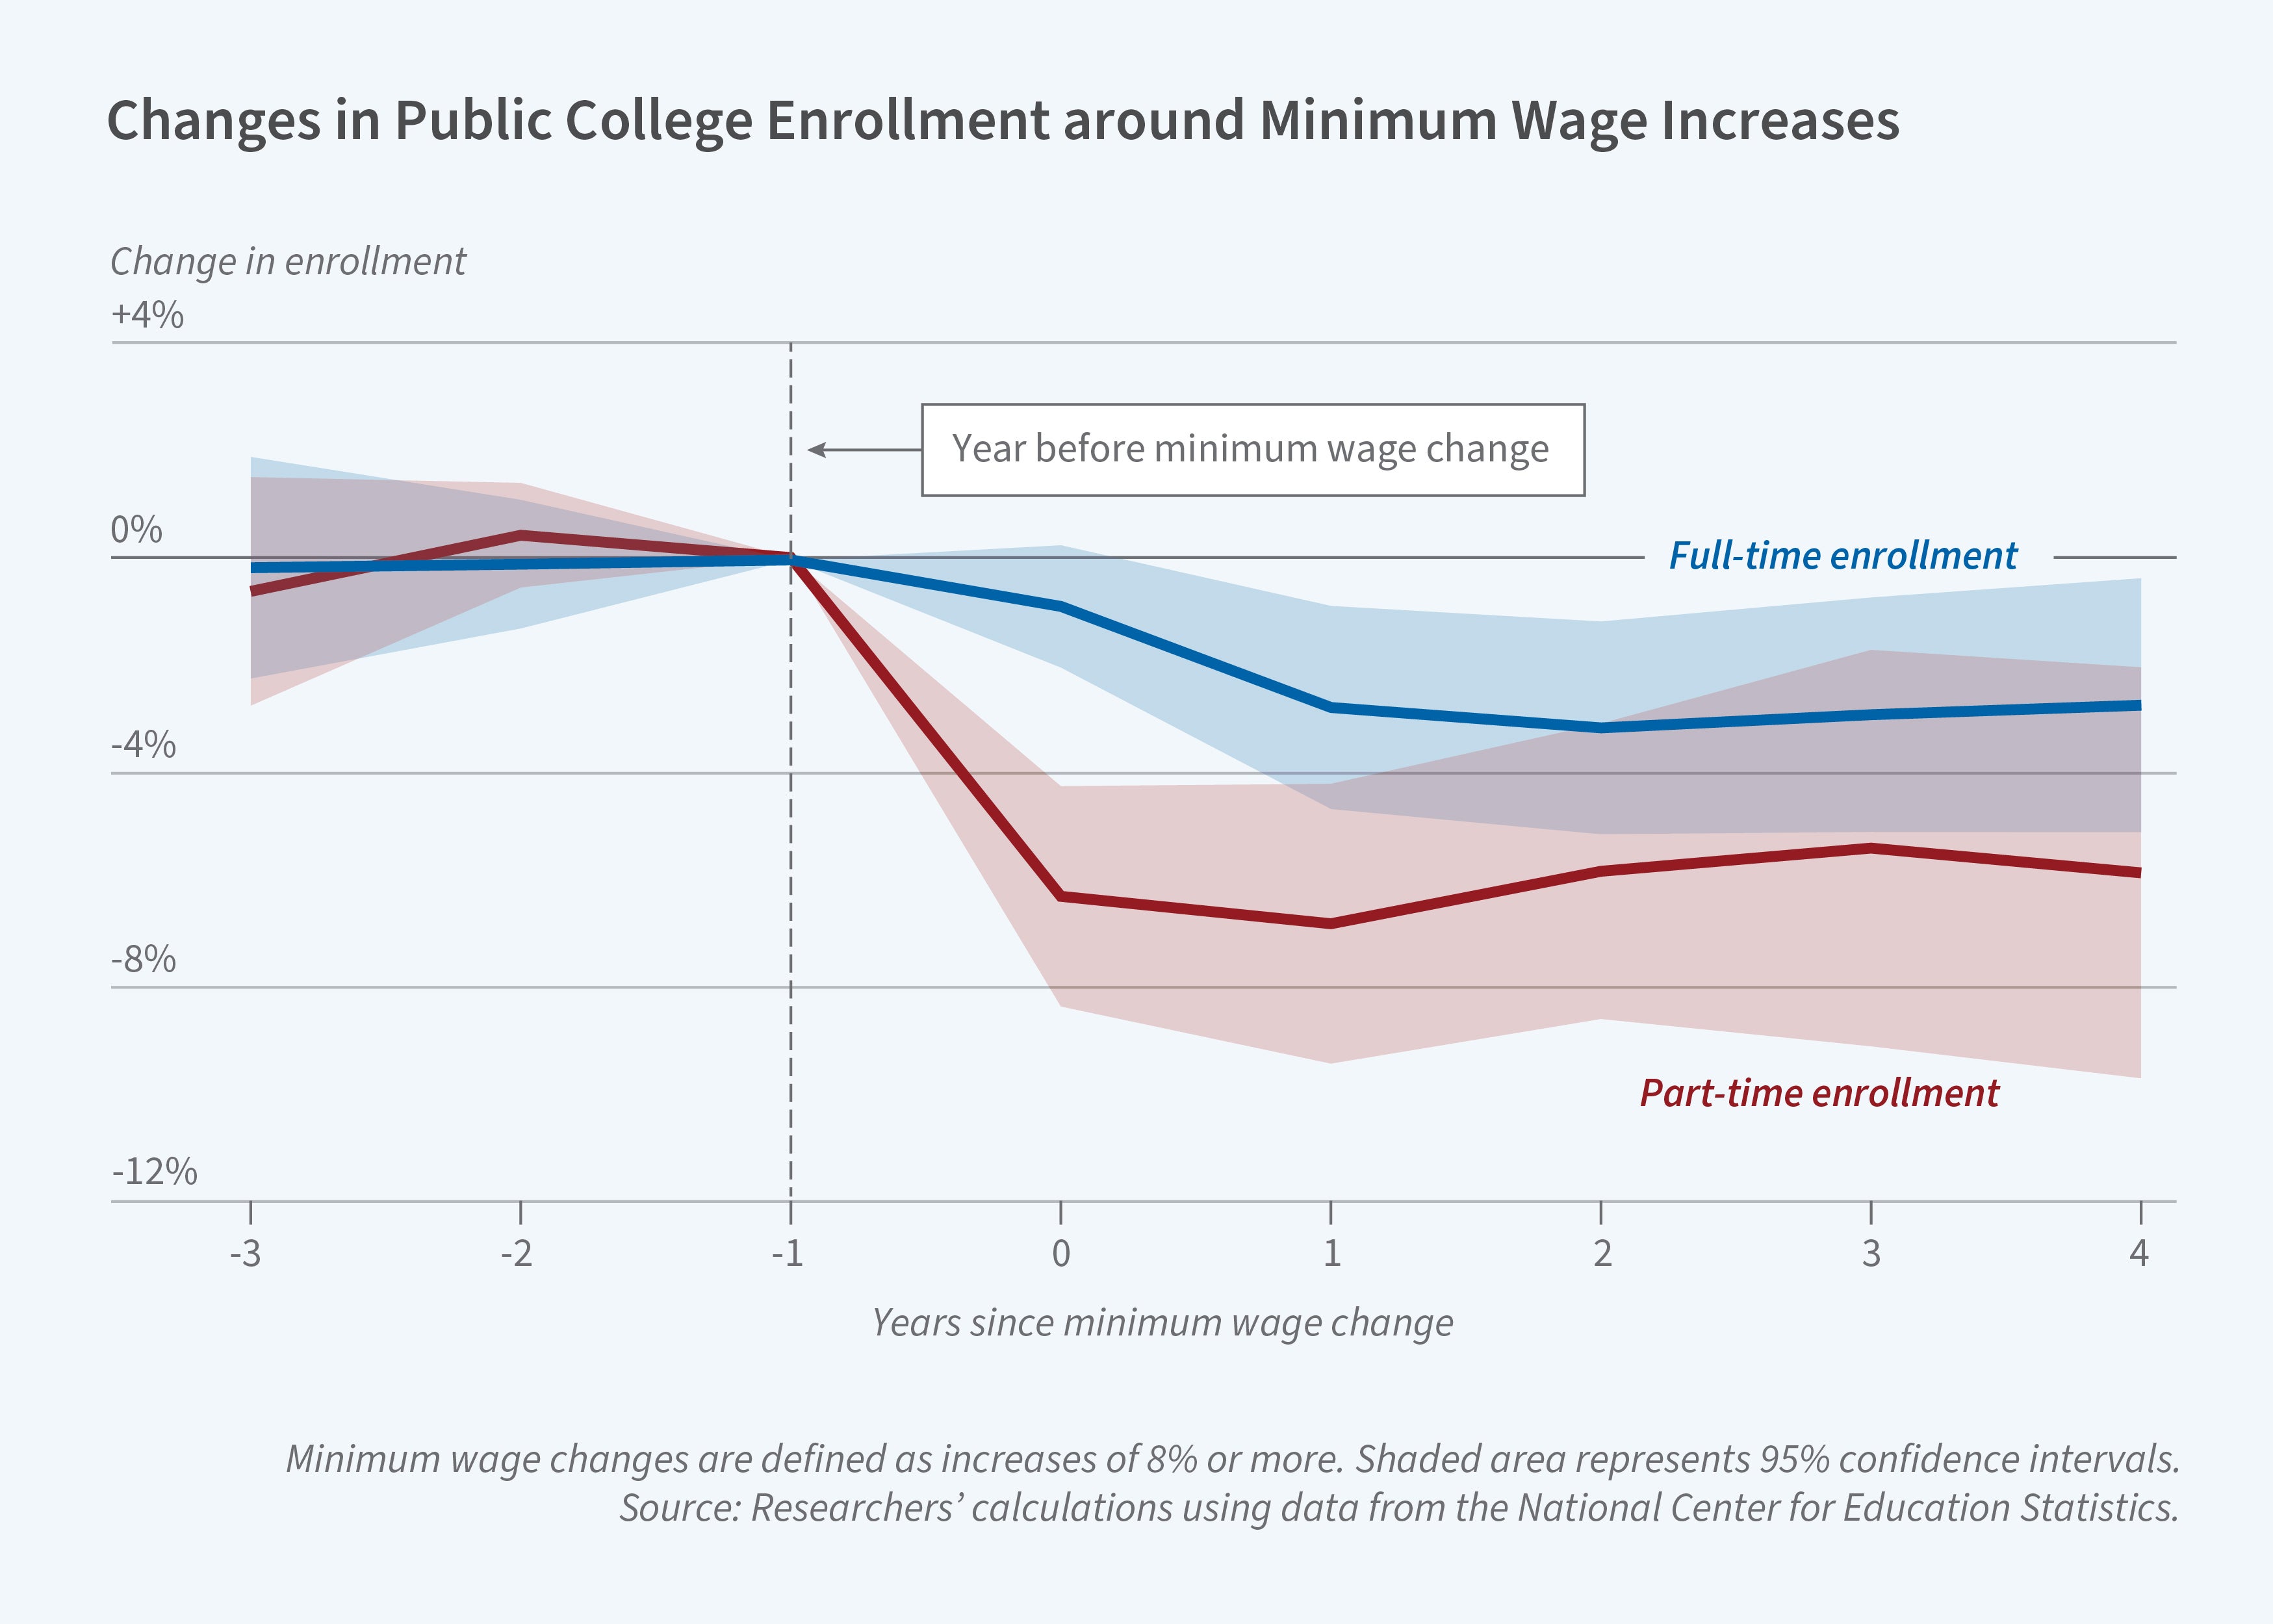 This figure is a line graph titled, Changes in Public College Enrollment around Minimum Wage Increases. The y-axis is labeled, change in enrollment. It ranges from negative 12 to positive 4 percent, increasing in increments of 4.  The x-axis is labeled, years since minimum wage change. It ranges from negative 3 to positive 4, increasing in increments of 1. There is a dotted vertical line at negative 1.  There are two lines on the graph: Full-time enrollment and Part-time enrollment. Both lines start near 0 and stay near 0 until they reach the dotted line at negative 1. To the right of the dotted line, the lines diverge. The full-time enrollment line dips to negative 1 percent at 0 years and then to 3 percent at 1 year. It levels off at 3 percent for the rest of the study period. The part-time enrollment line has a steeper drop to 6 percent at 0 years where it then hovers between 5 and 6 percent for the rest of the study period.  The note on the figure reads, Minimum wage changes are defined as increases of 8% or more. Shaded area represents 95% confidence intervals. The source line reads, Source: Researchers’ calculations using data from the National Center for Education Statistics.